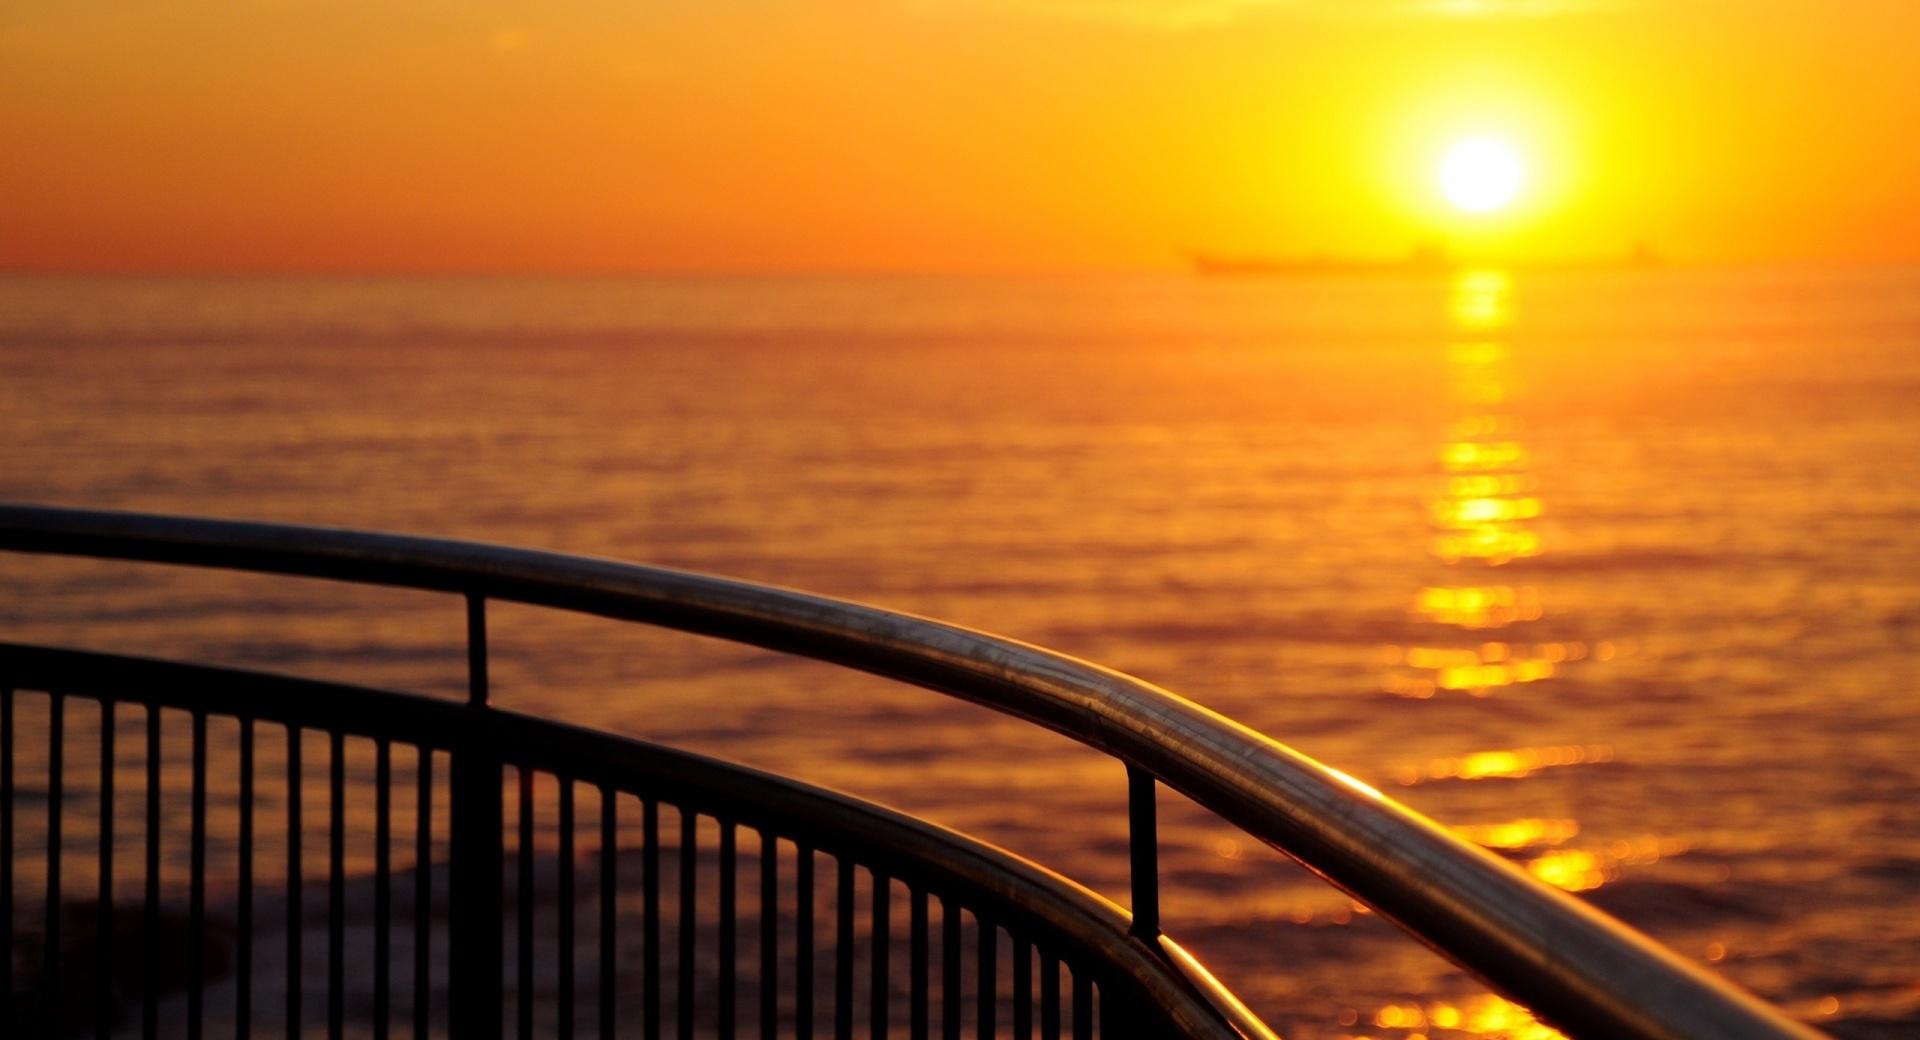 Railing By The Sea wallpapers HD quality